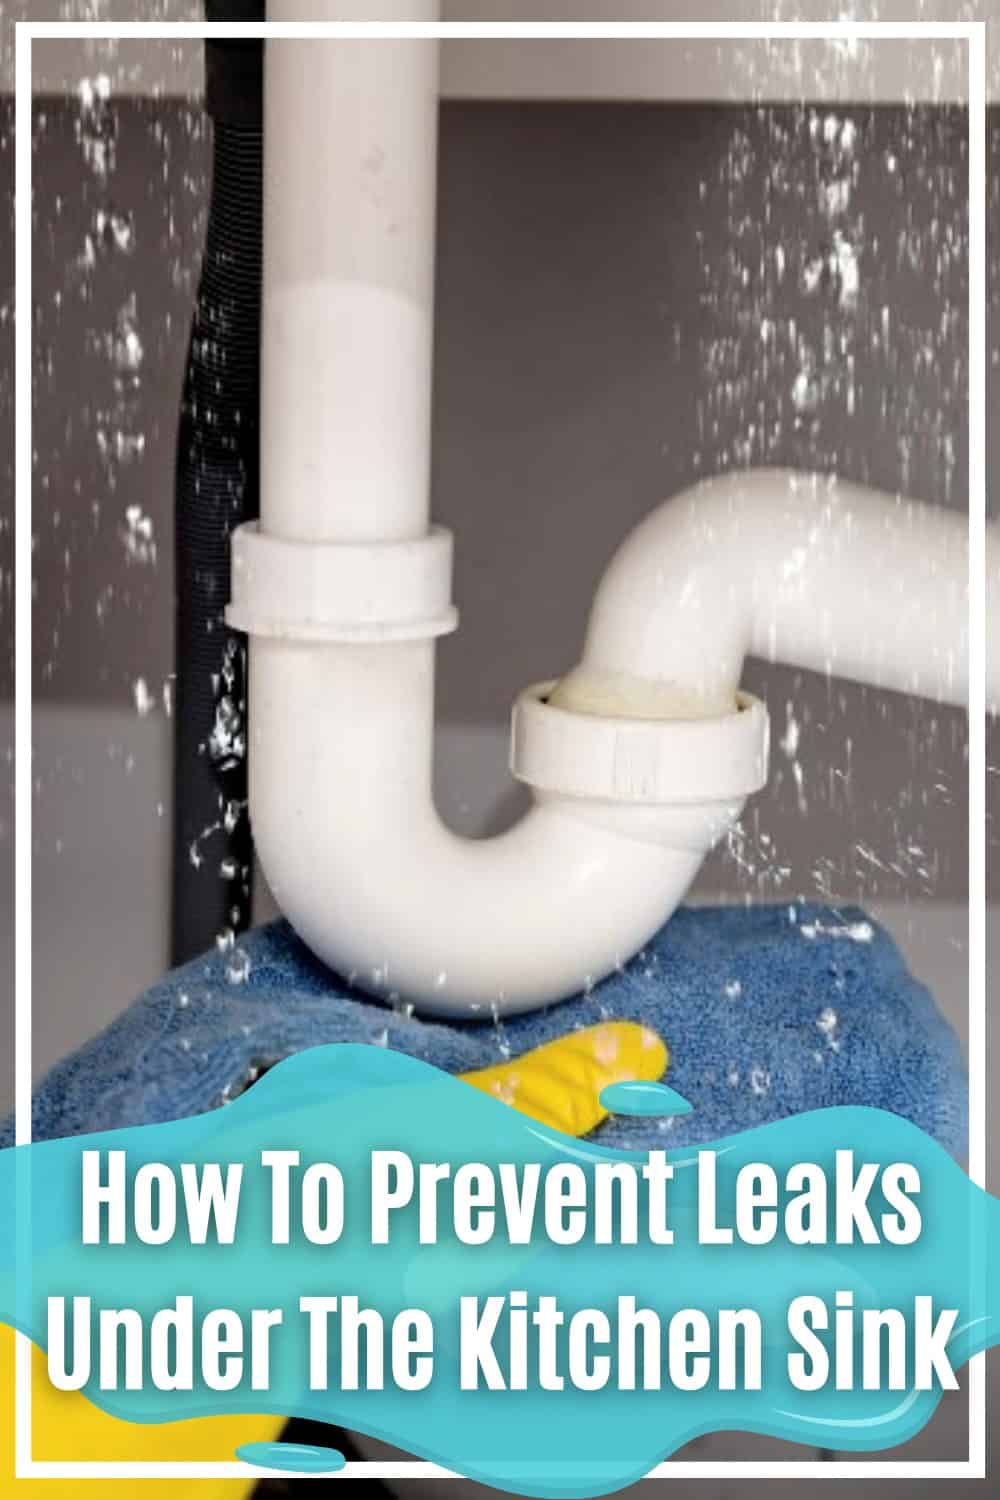 Prevent water from getting under the kitchen sink and accumulating